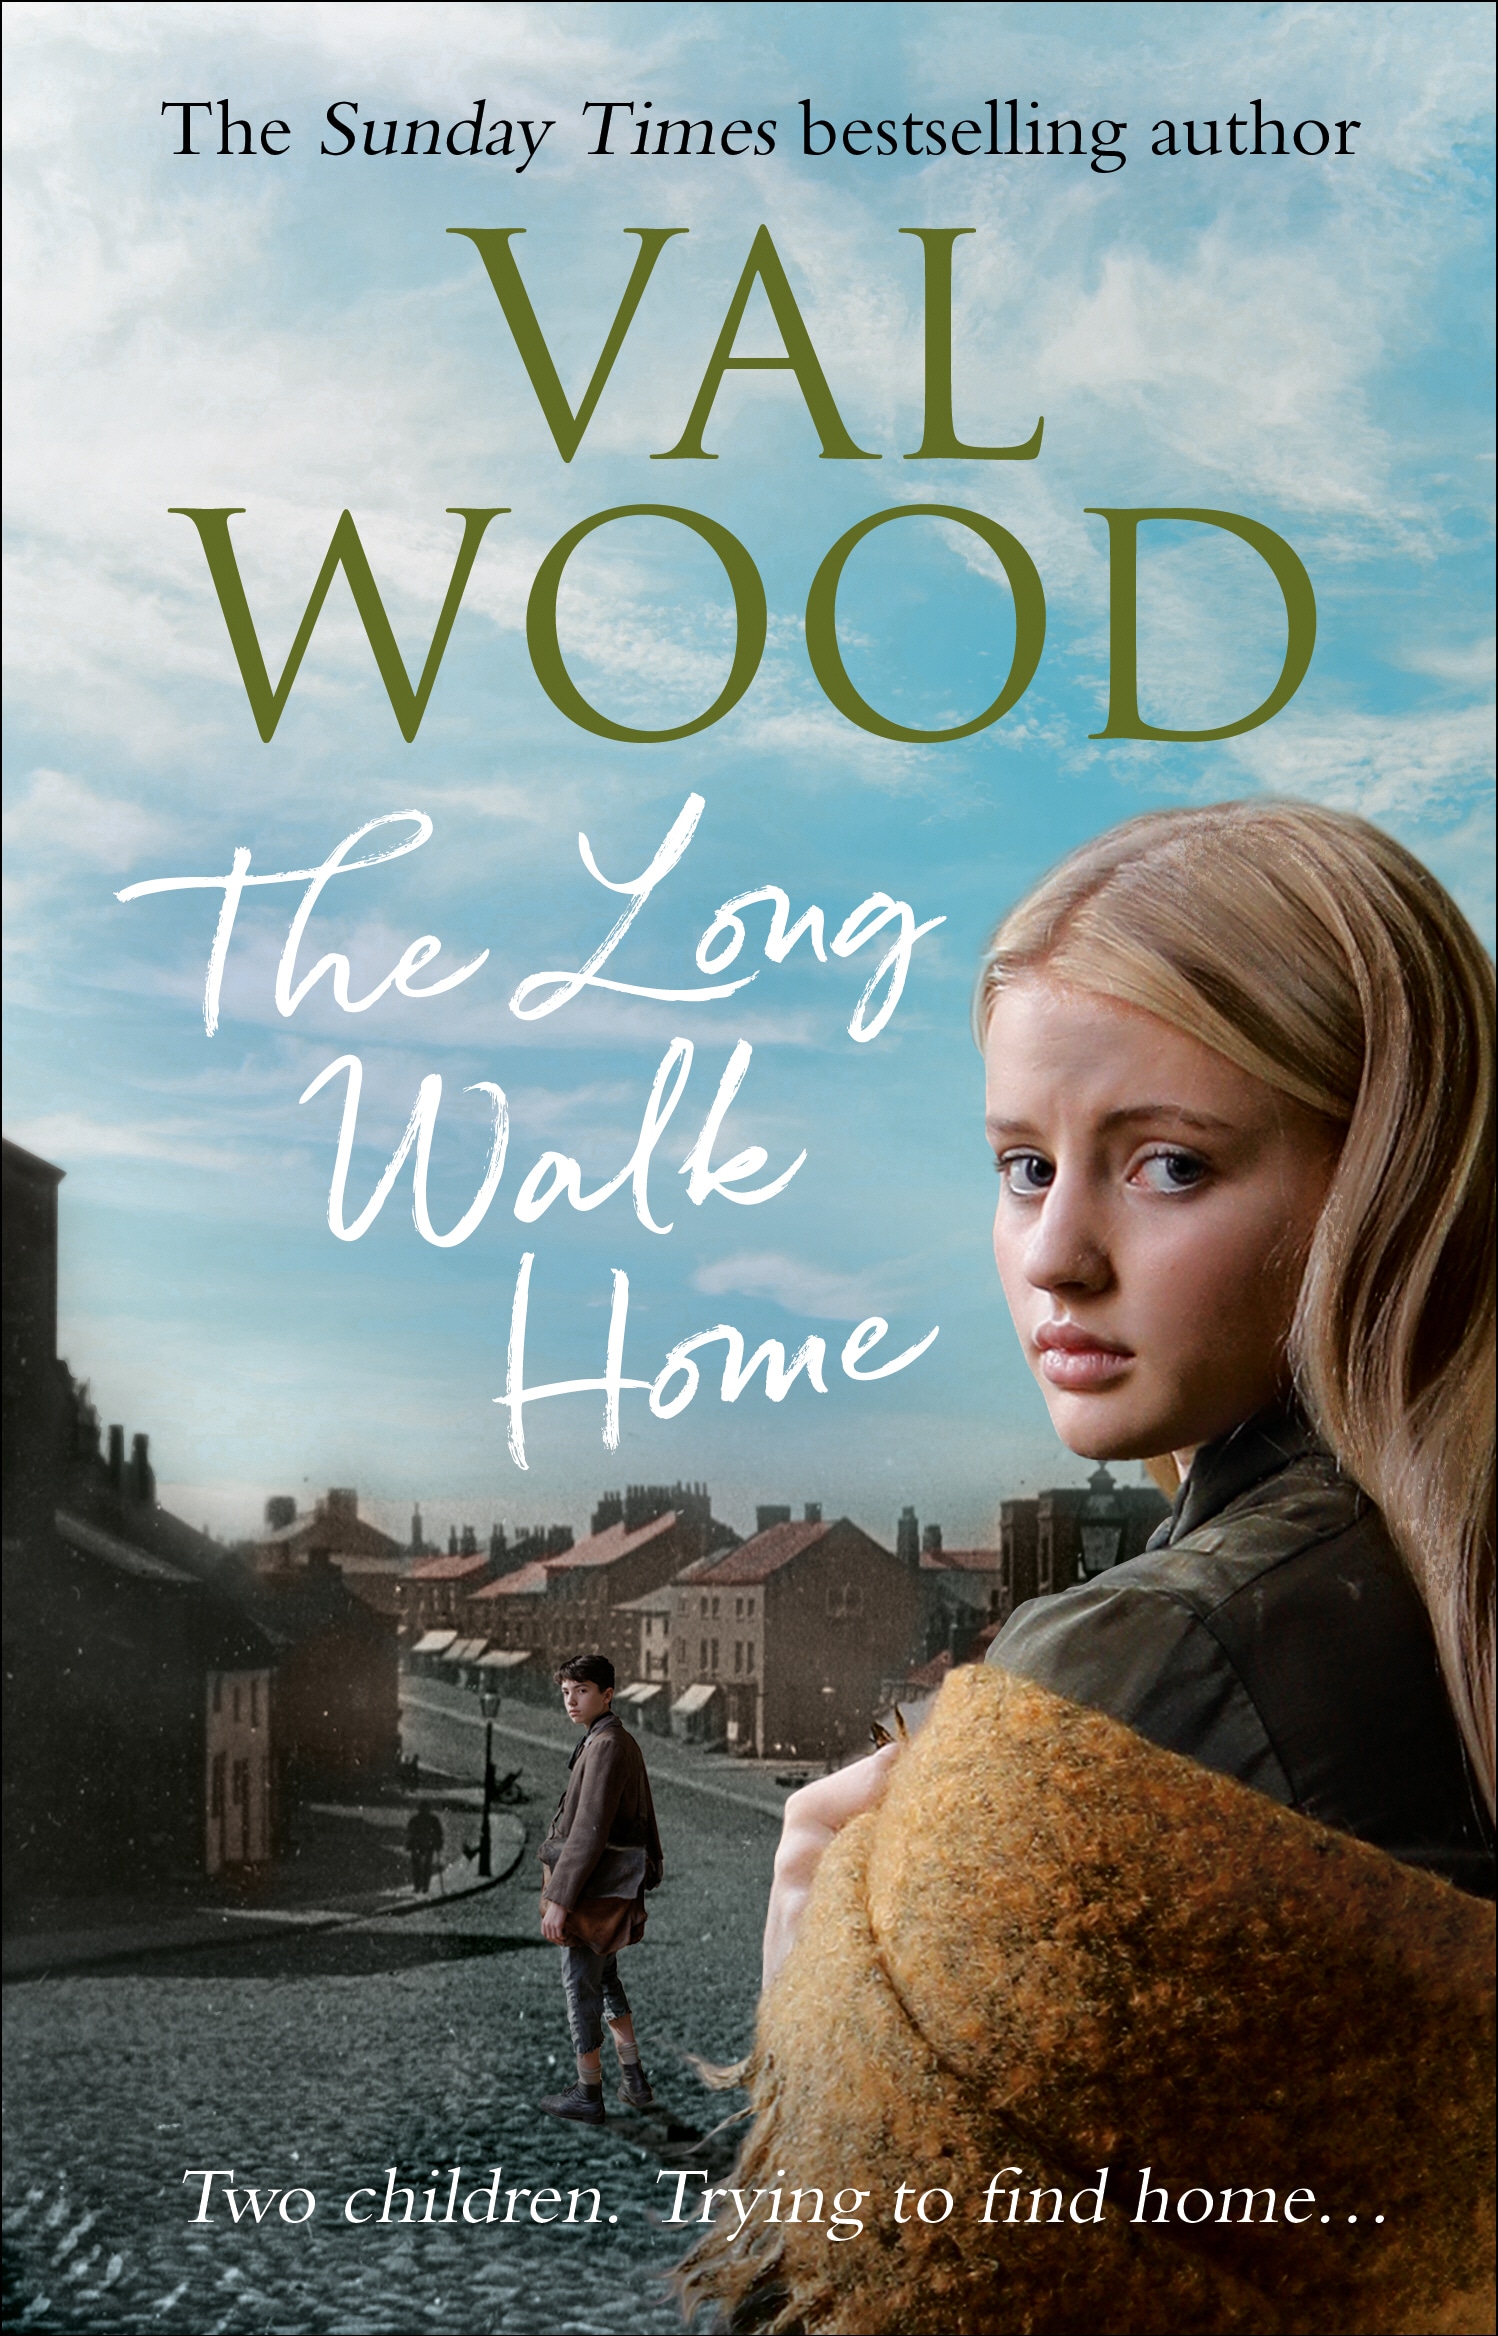 Book “The Long Walk Home” by Val Wood — July 23, 2020